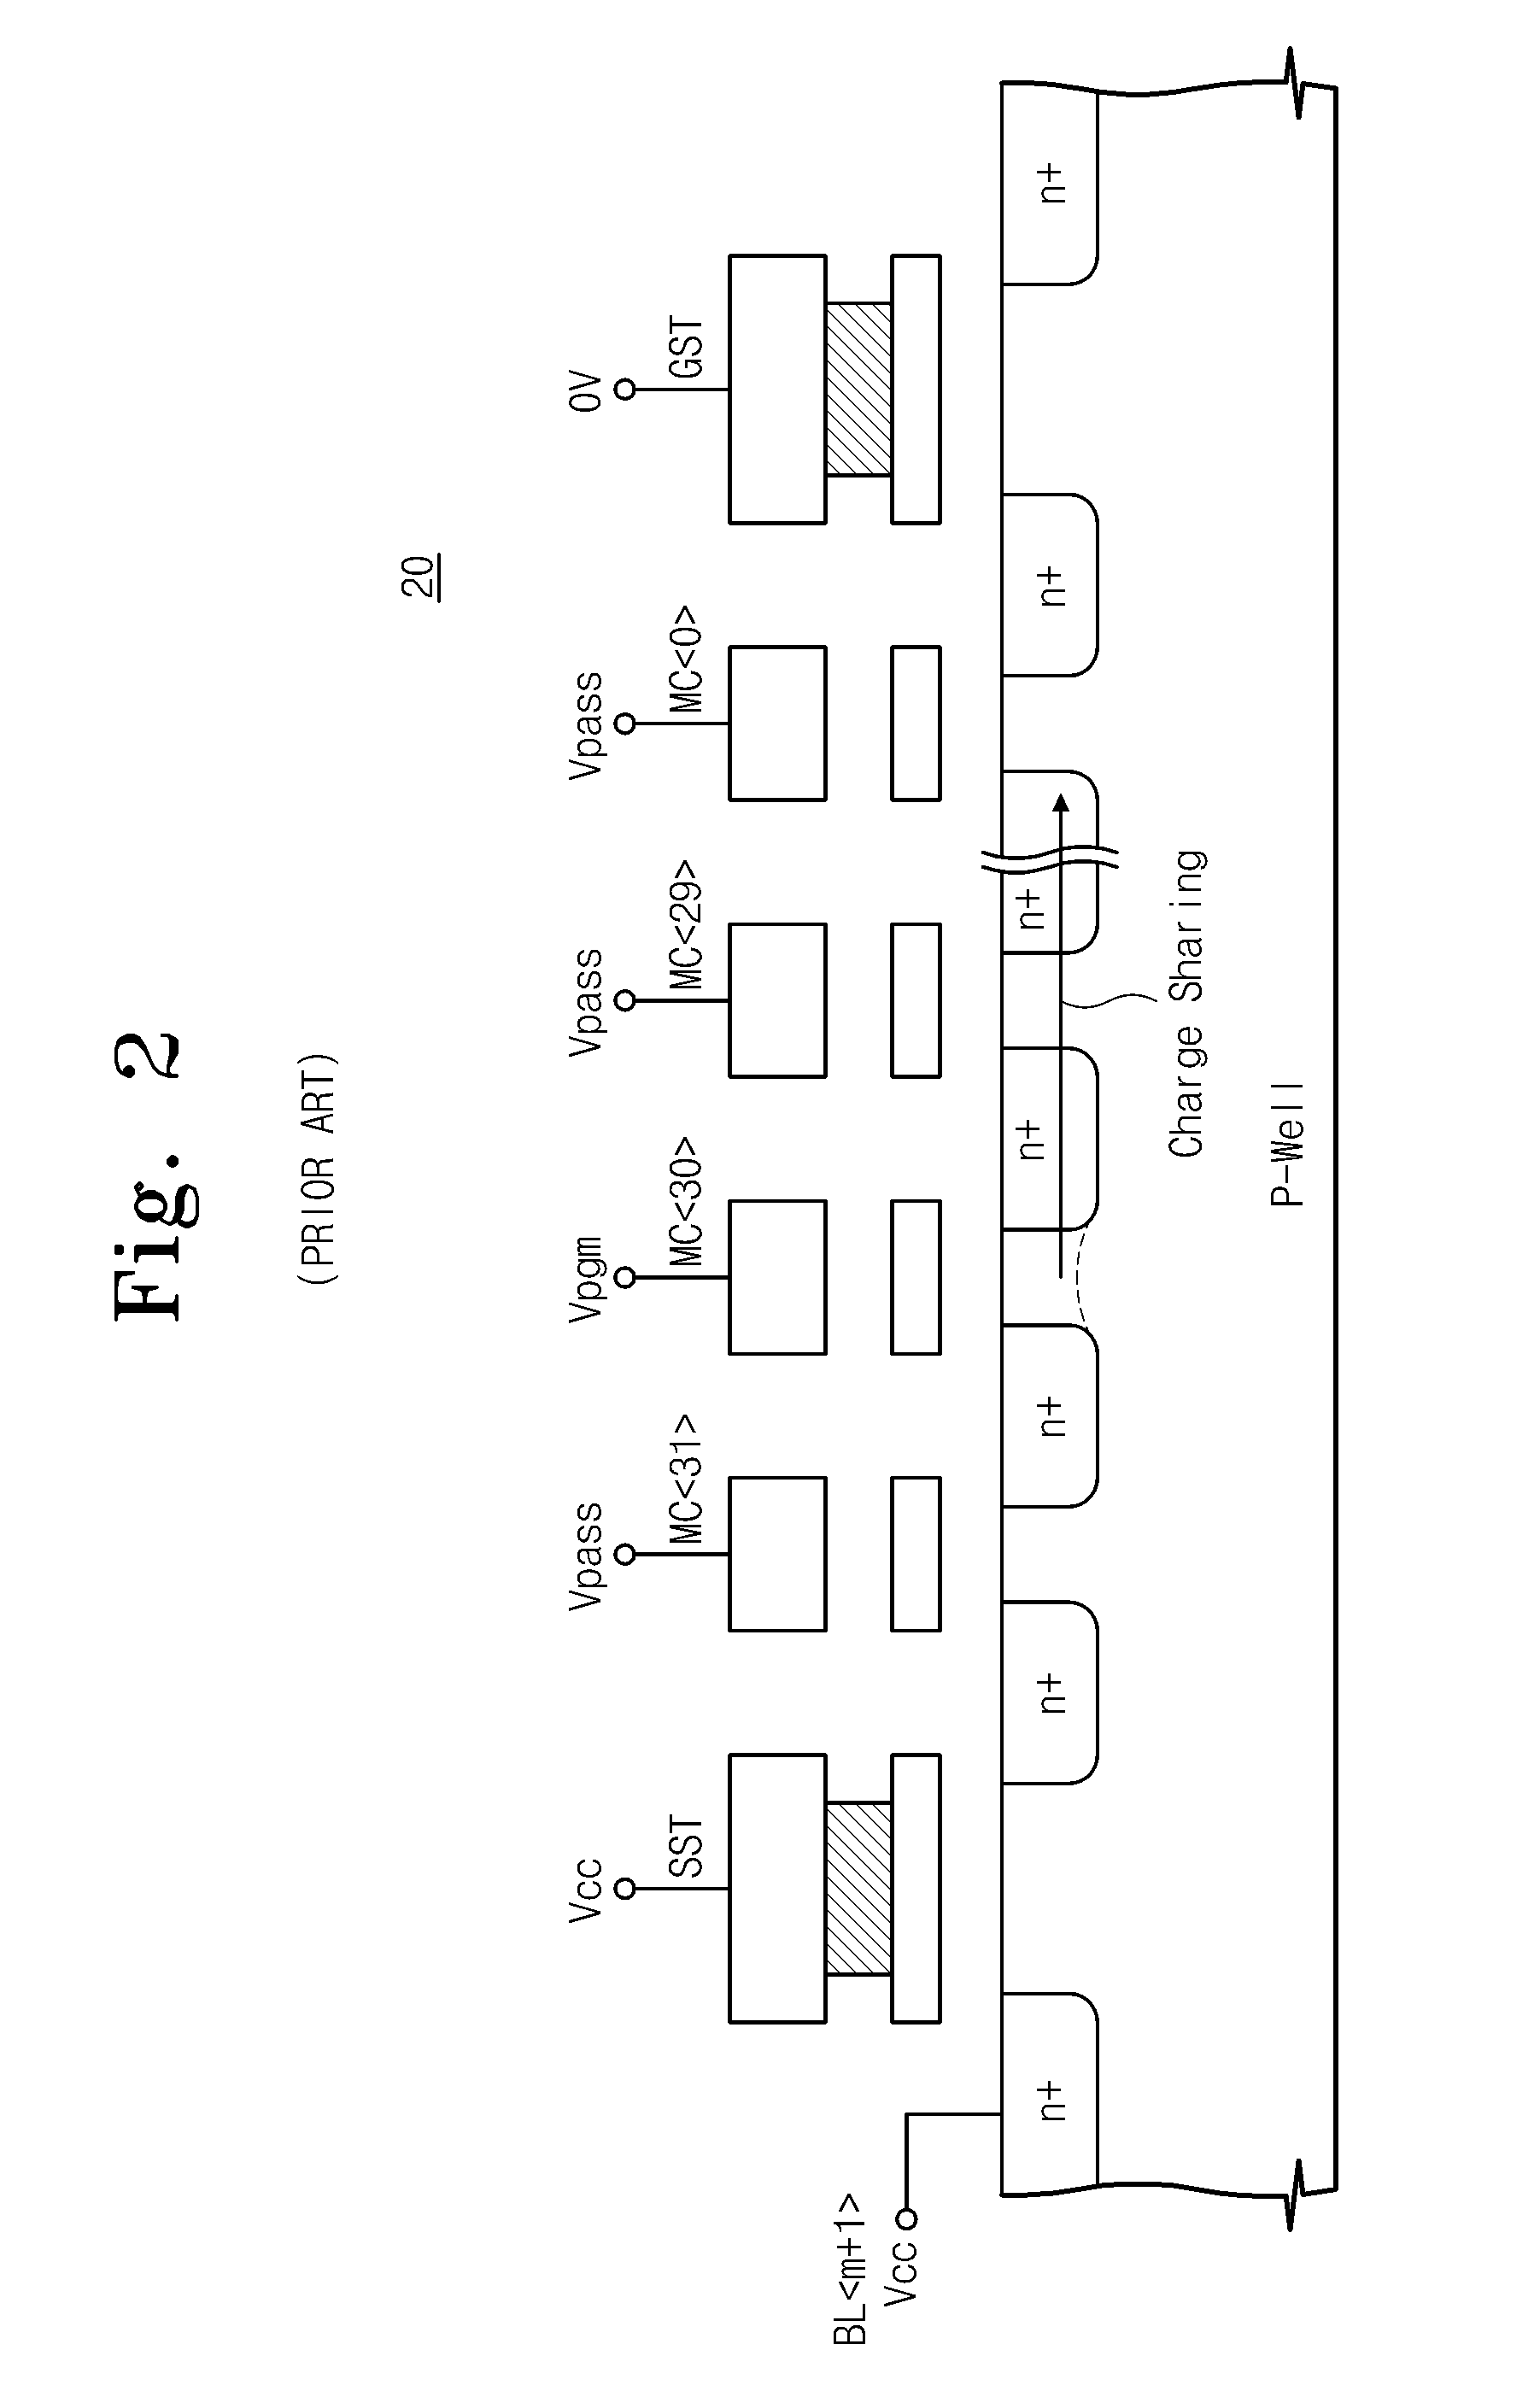 Flash memory device including a dummy cell